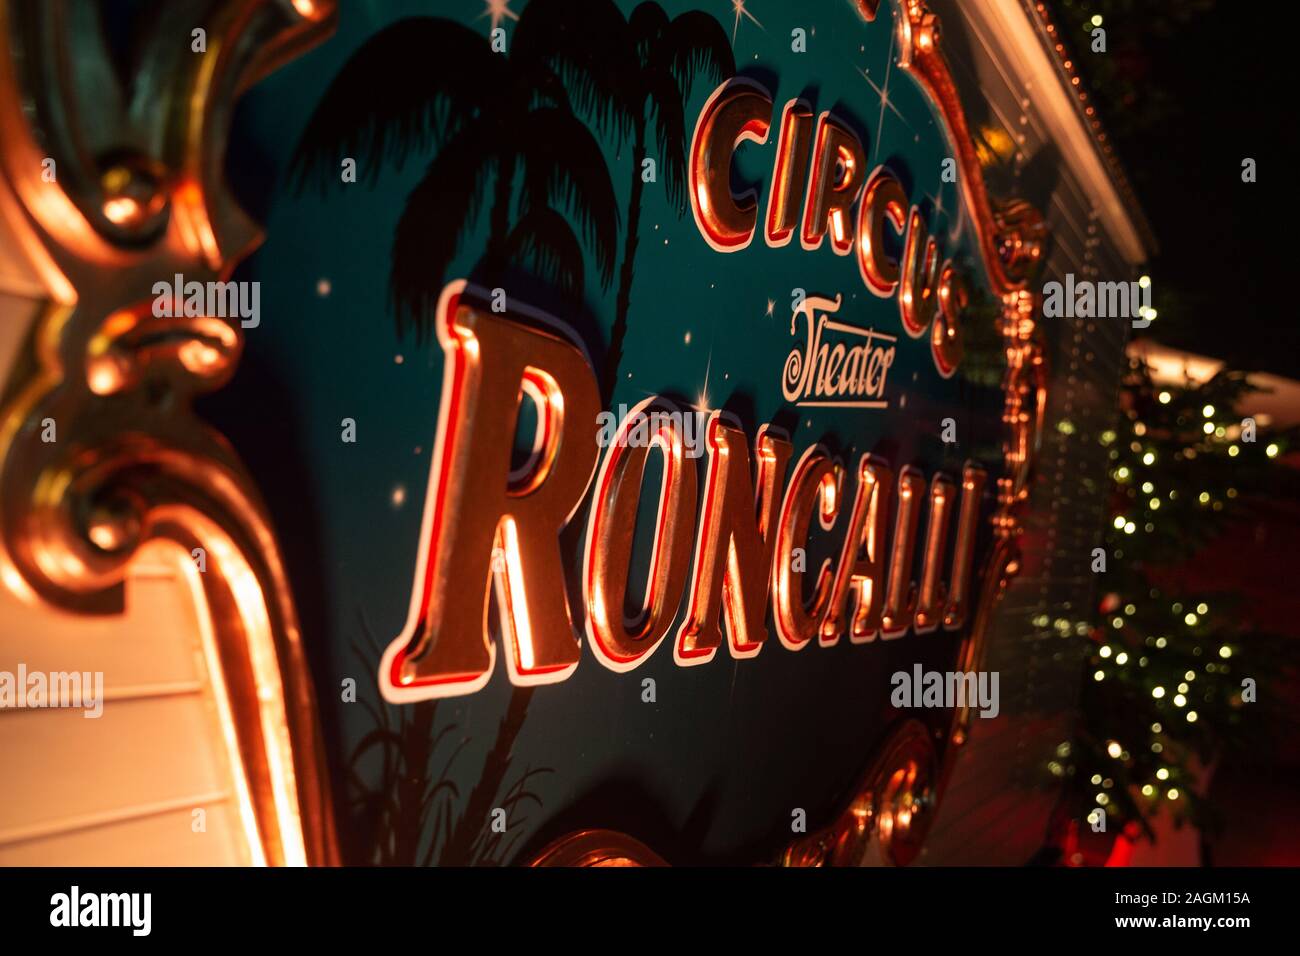 Berlin Germany 16th Dec 2019 Exterior View Of The Roncalli Christmas Circus Circus Roncalli Will Be